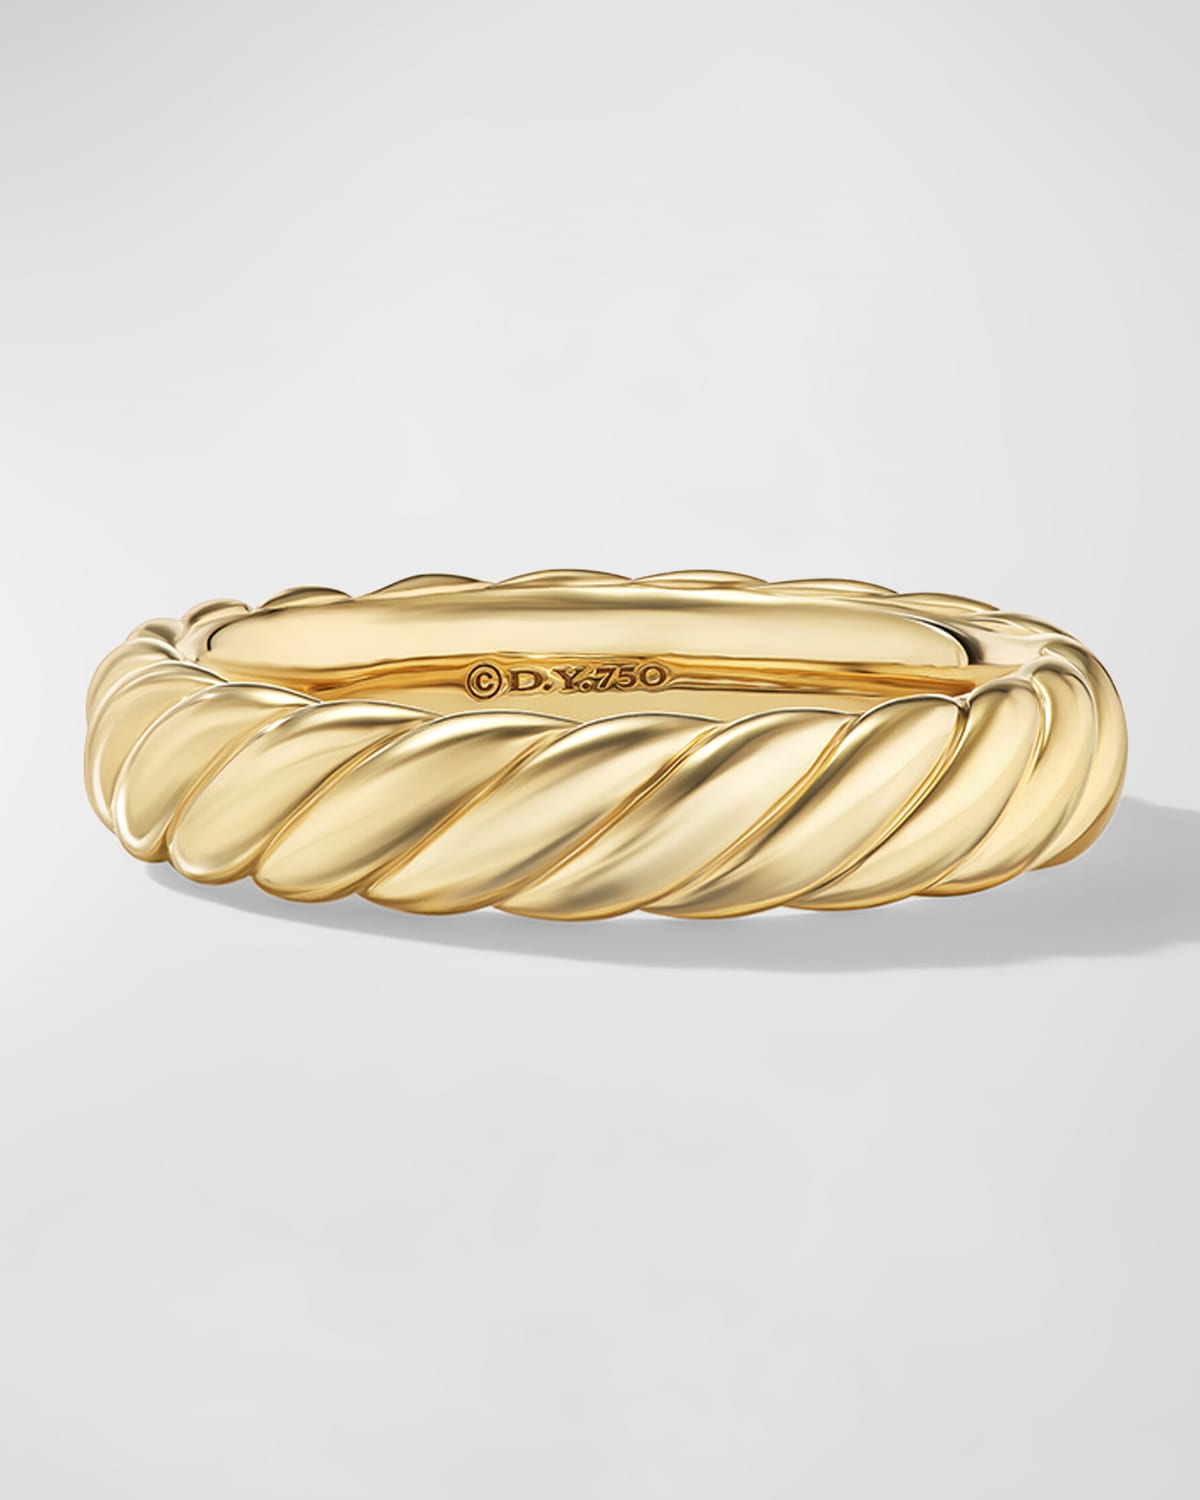 David Yurman Sculpted Cable Band Ring in 18K Gold, 4.5mm, Size 6